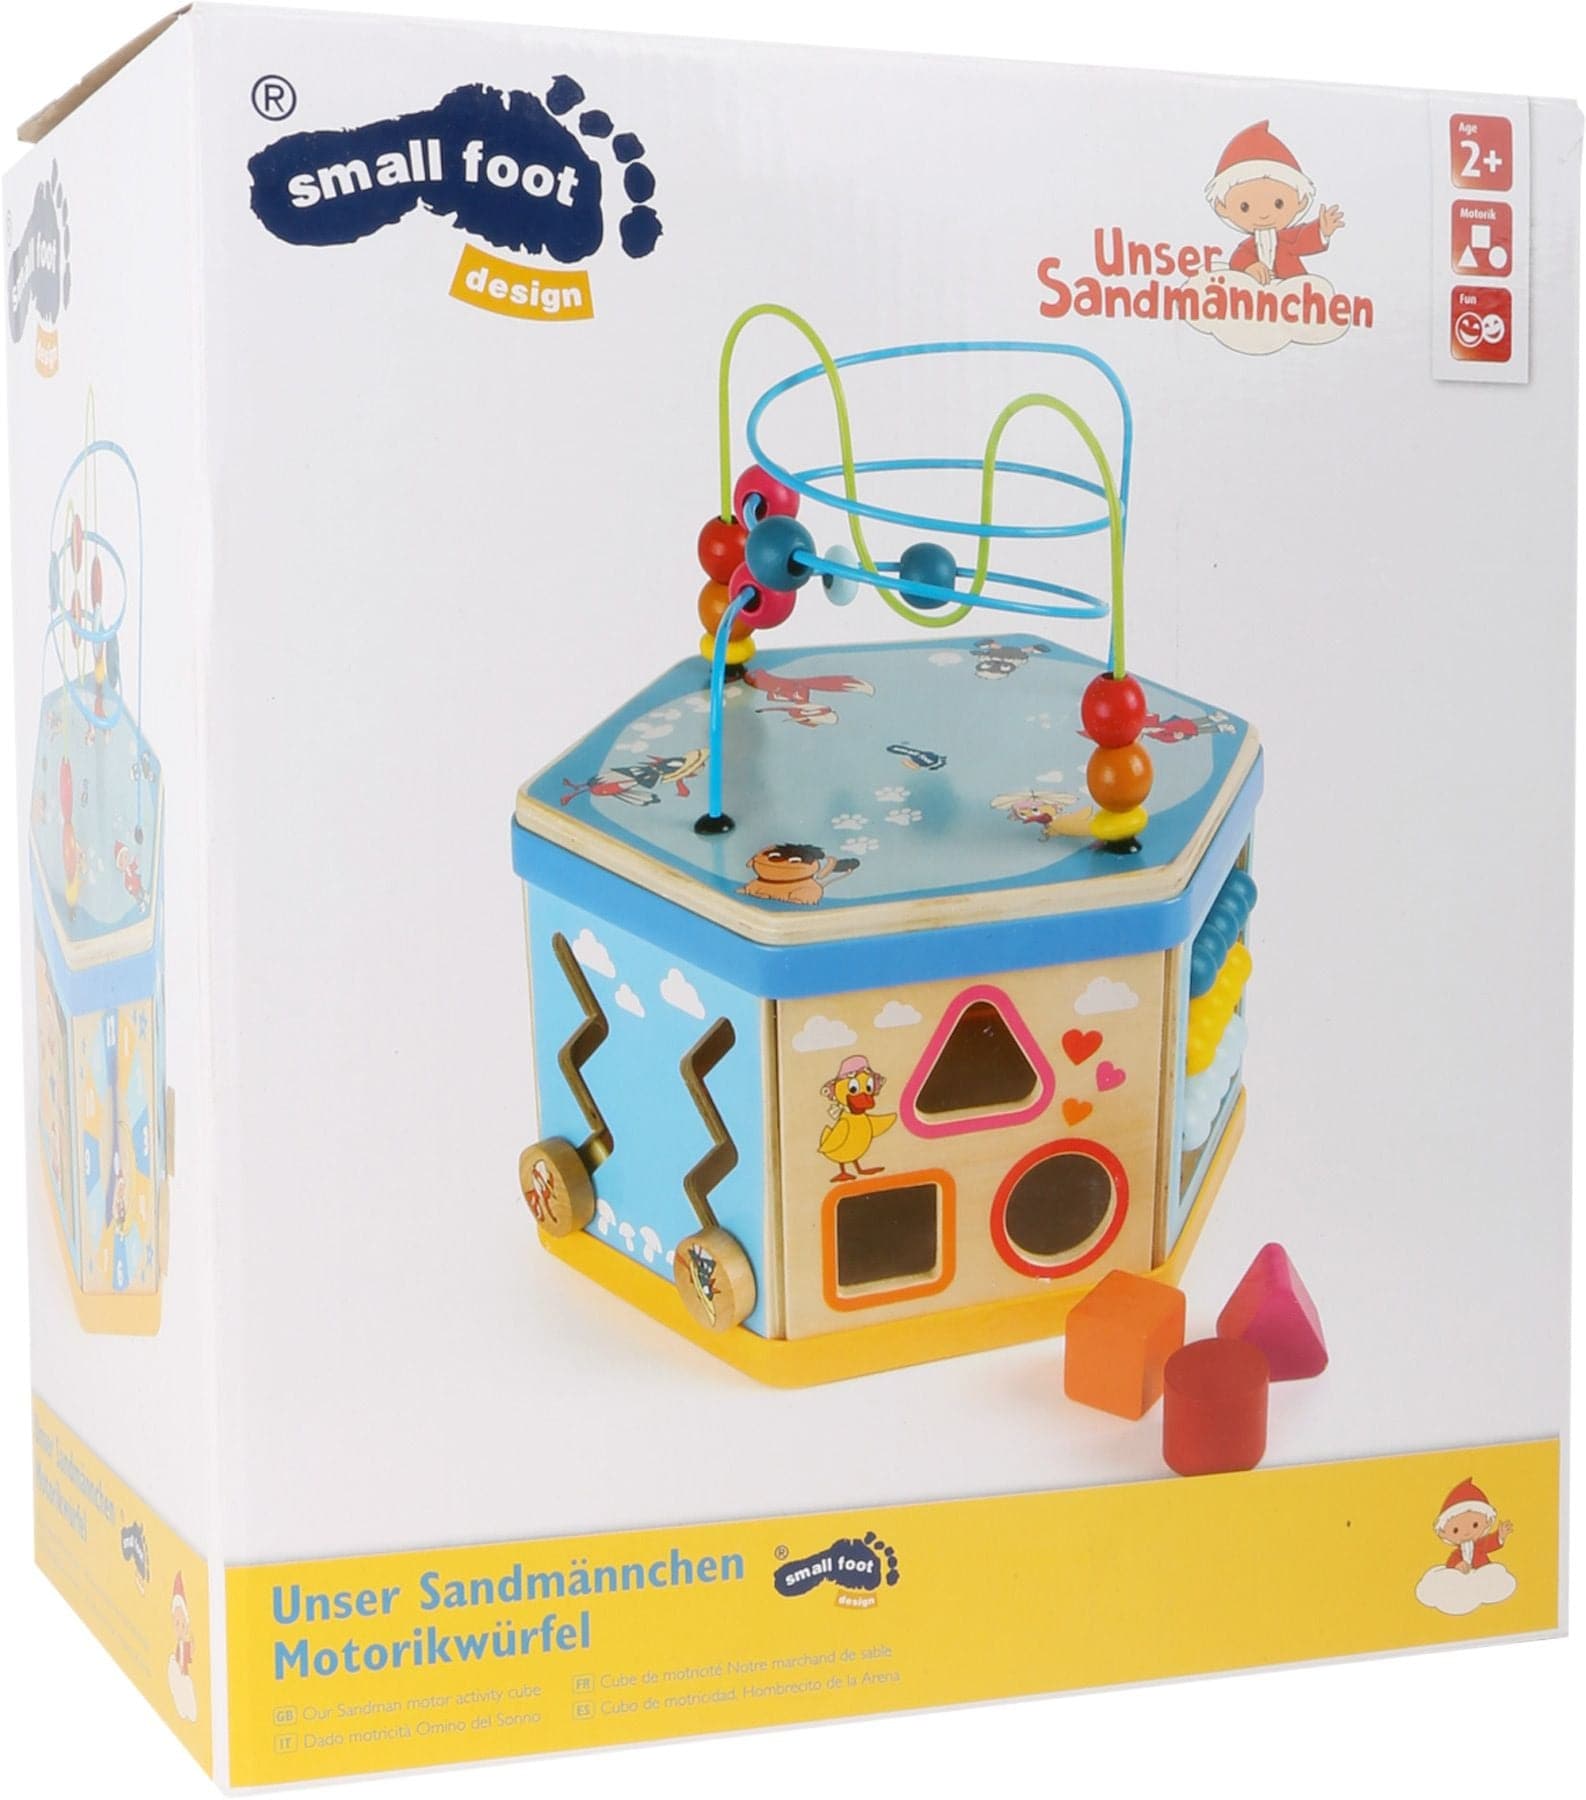 Sandman Motor Skills Training Cube, Looking for a fun and engaging toy that will help your child develop important motor skills and abilities? Look no further than the Sandman Motor Skills Training Cube! Made from sturdy wood and featuring colorful images of Sandman and his friends, this cube is packed with exciting features that will keep your child entertained for hours. Each side of the cube offers a different function for playing, including a motor skills training loop that can be removed to empty out t